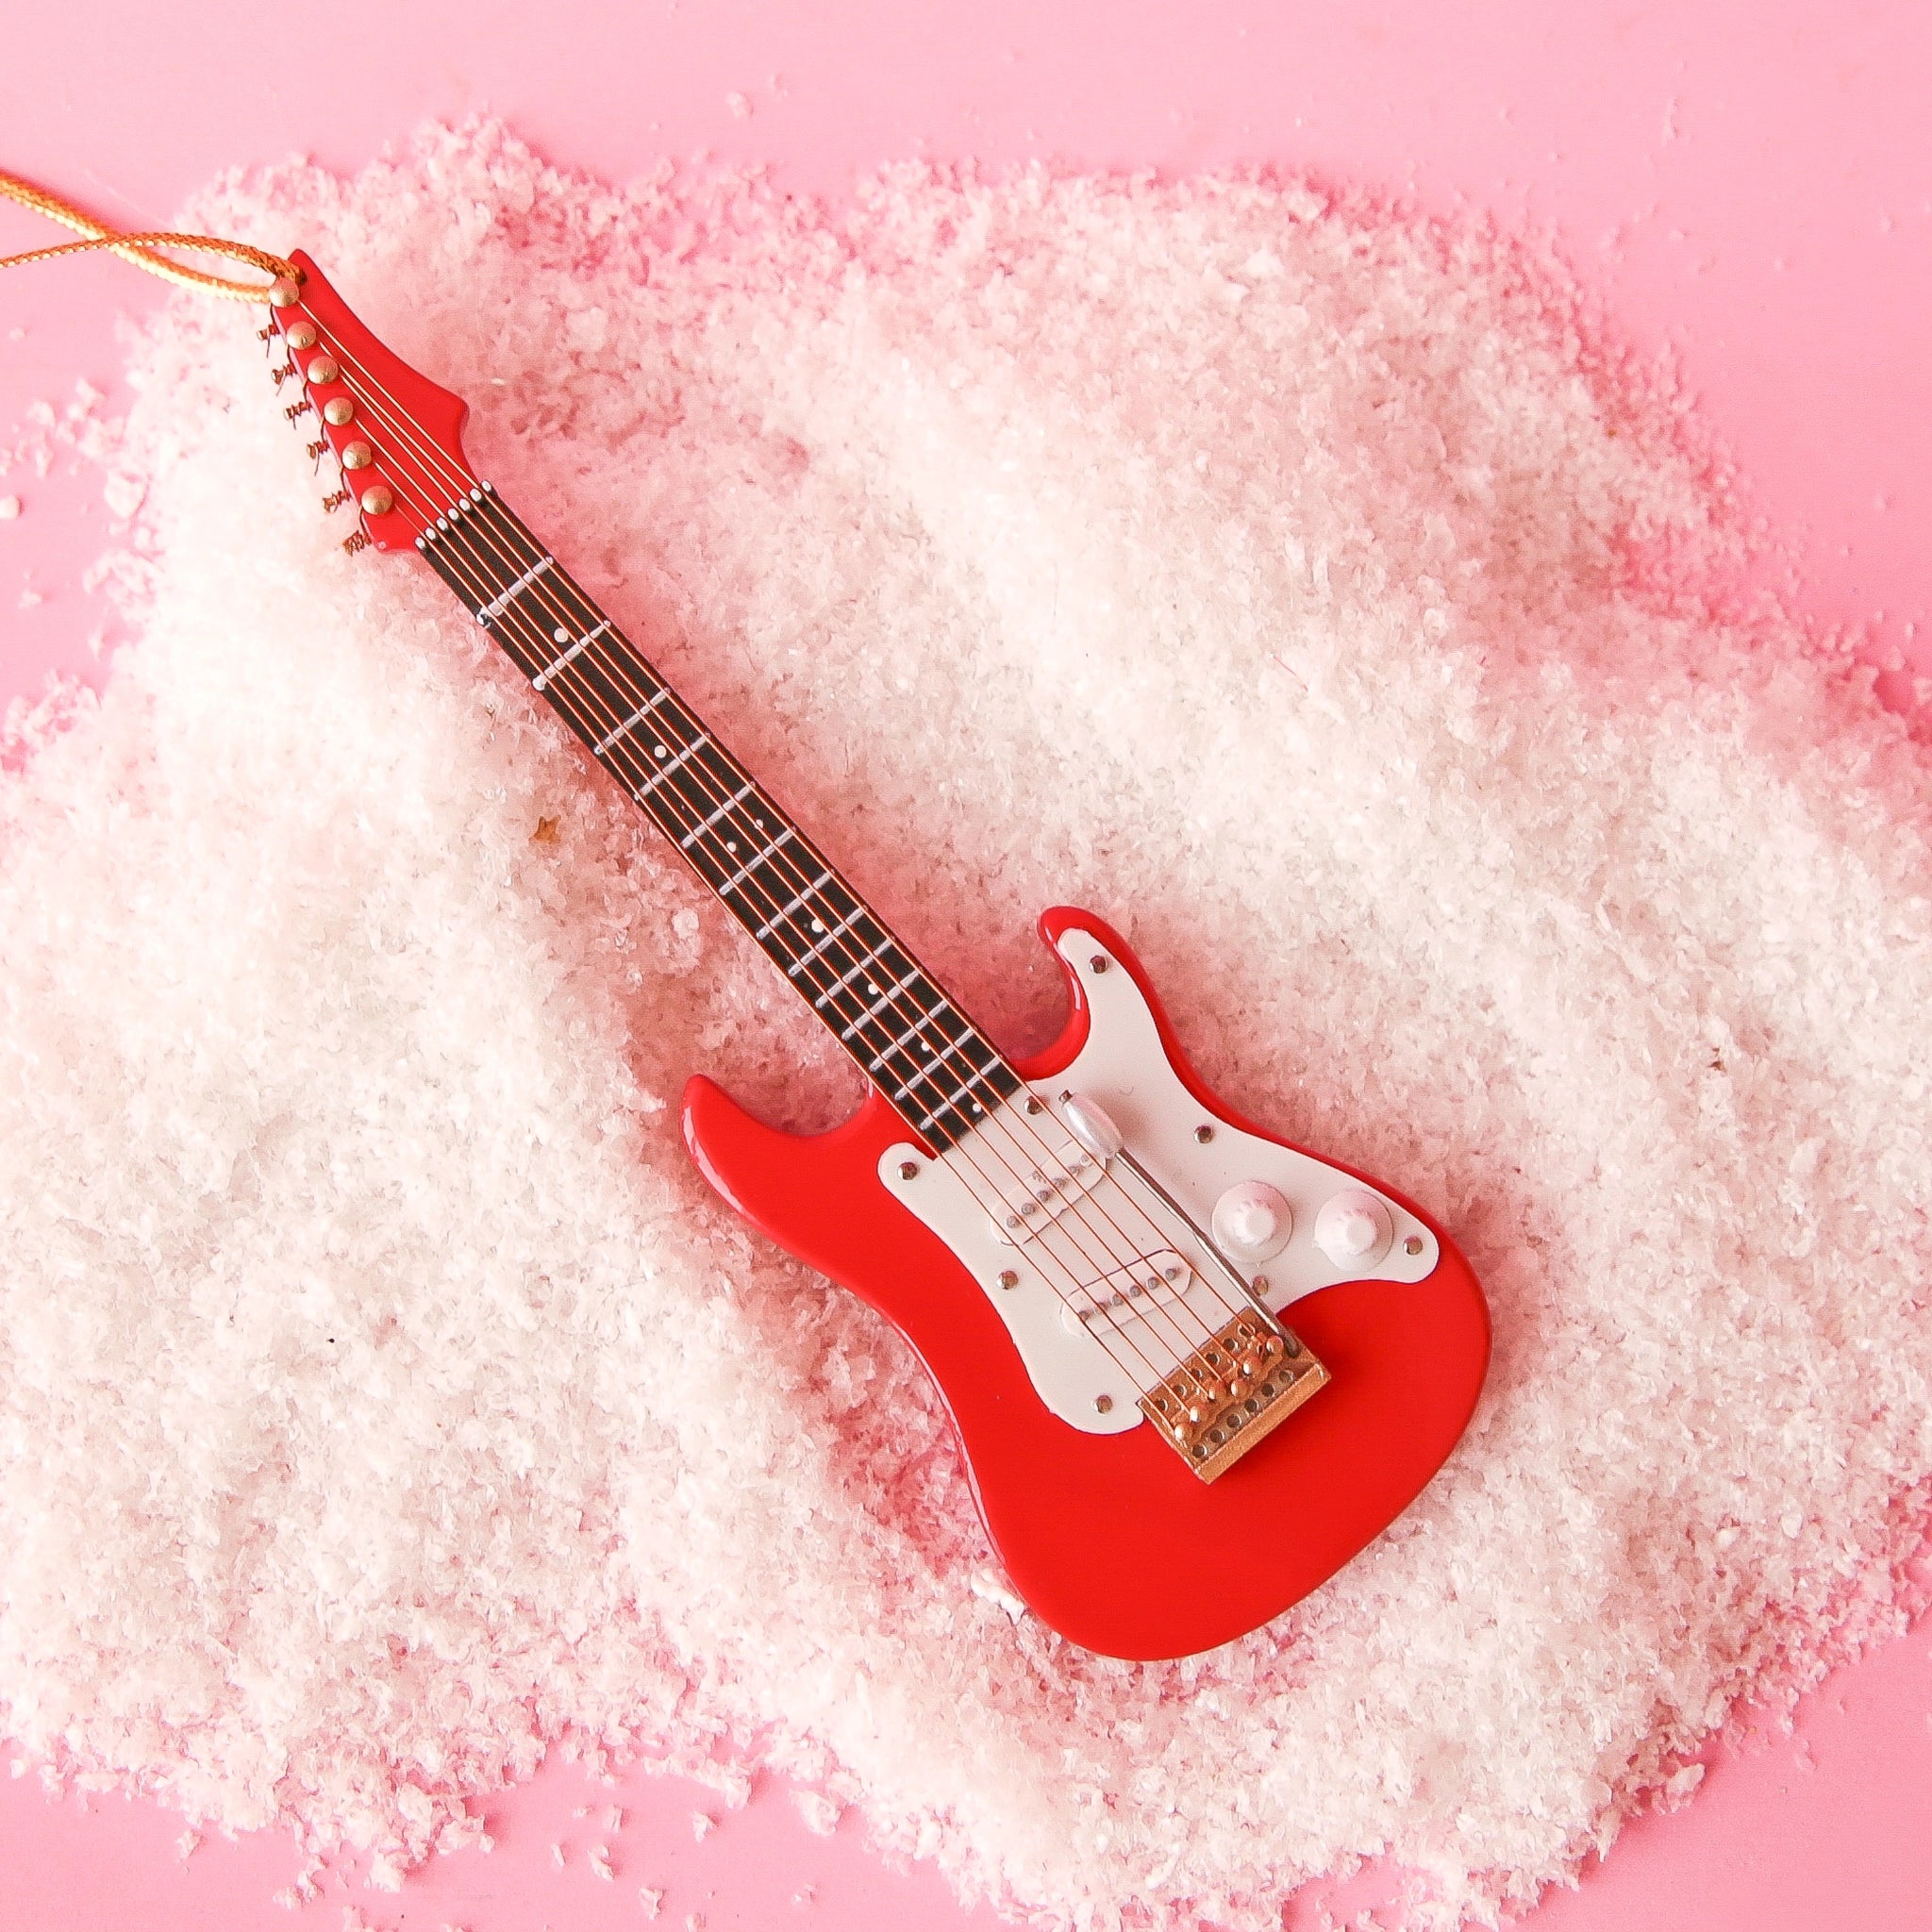 On a pink snowy background is a red and white electric guitar ornament.